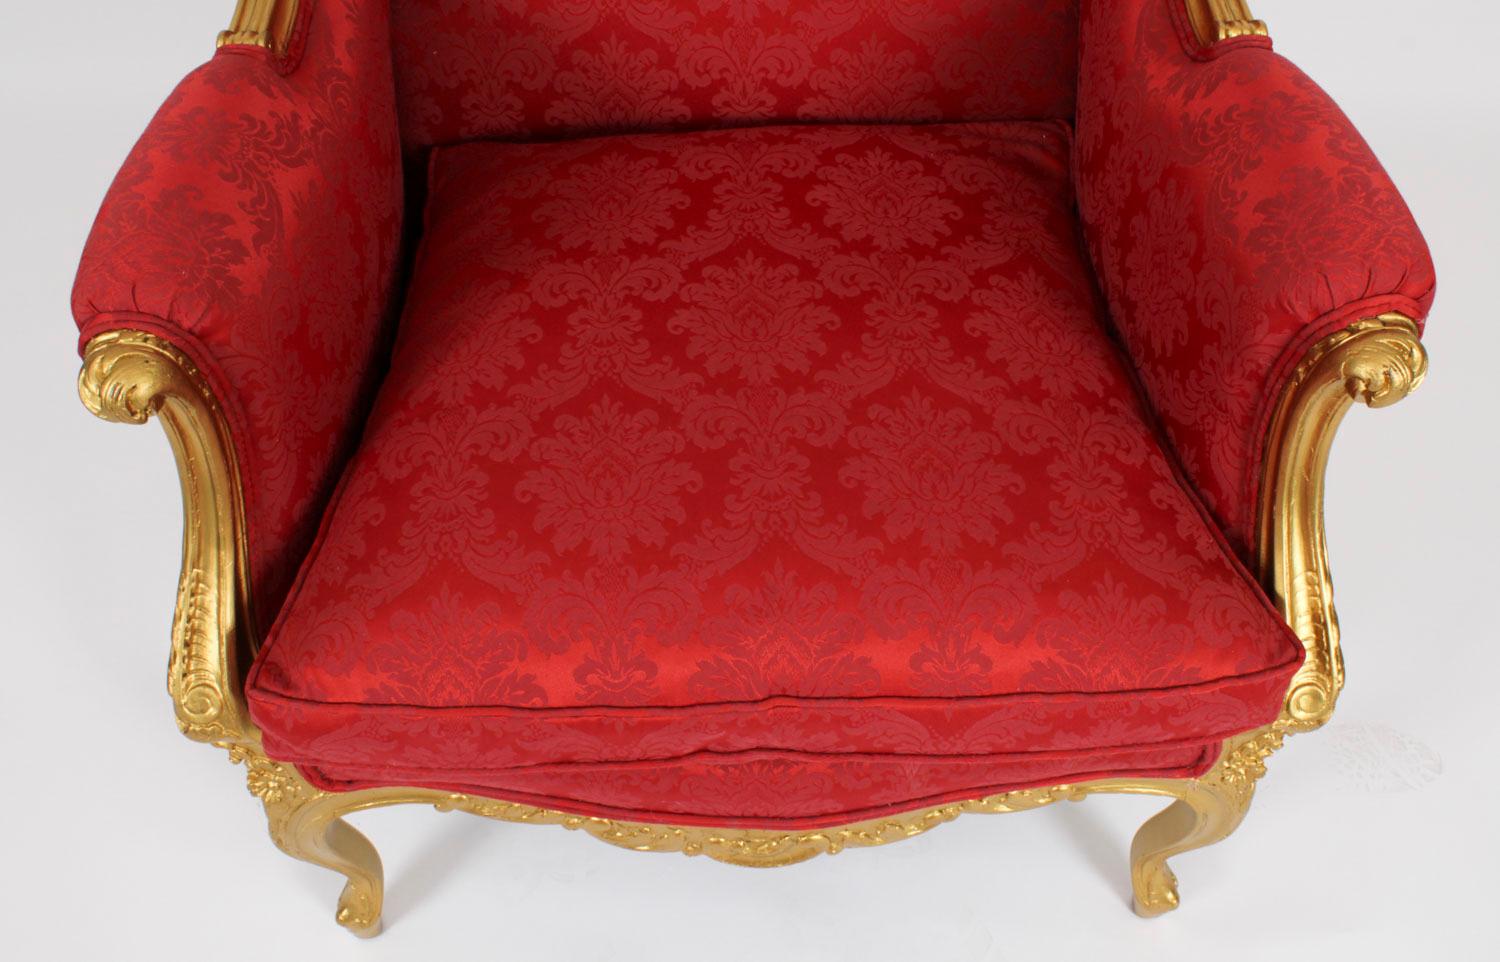 Antique Louis XV Revival Giltwood Shaped Bergere Armchair, 19th Century In Good Condition For Sale In London, GB